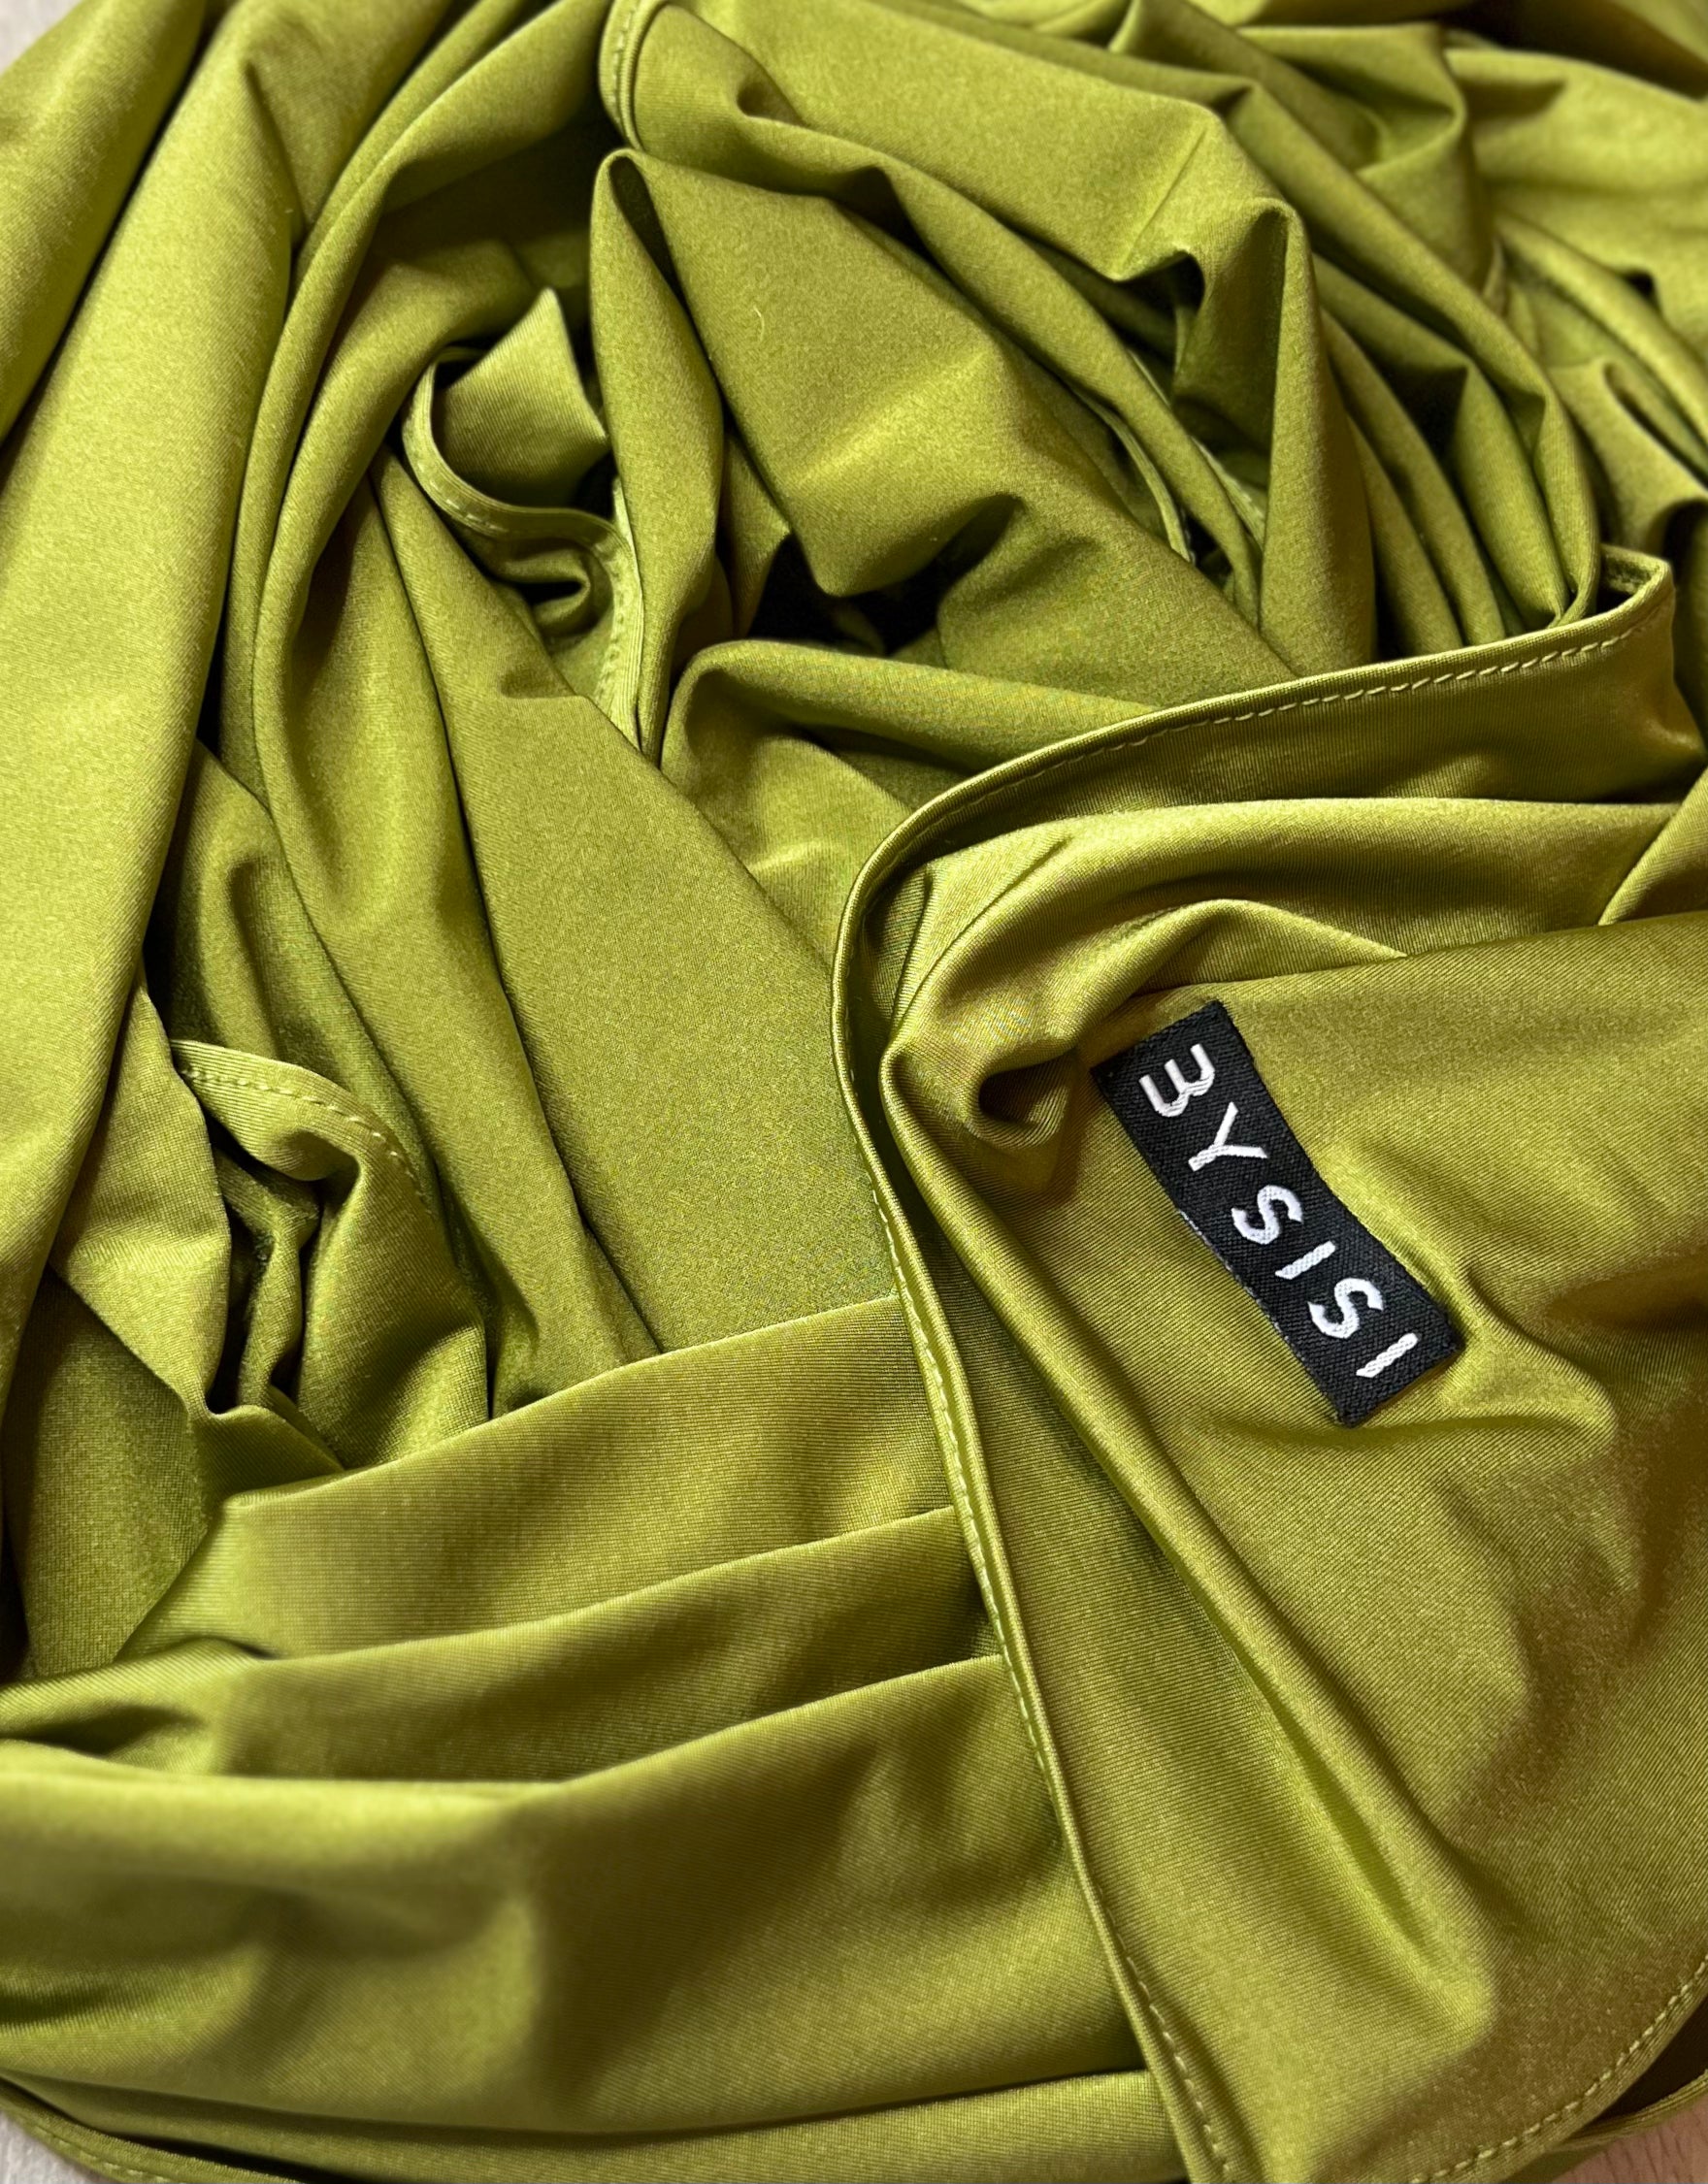 Satin Jersey in Lime - BYSISI